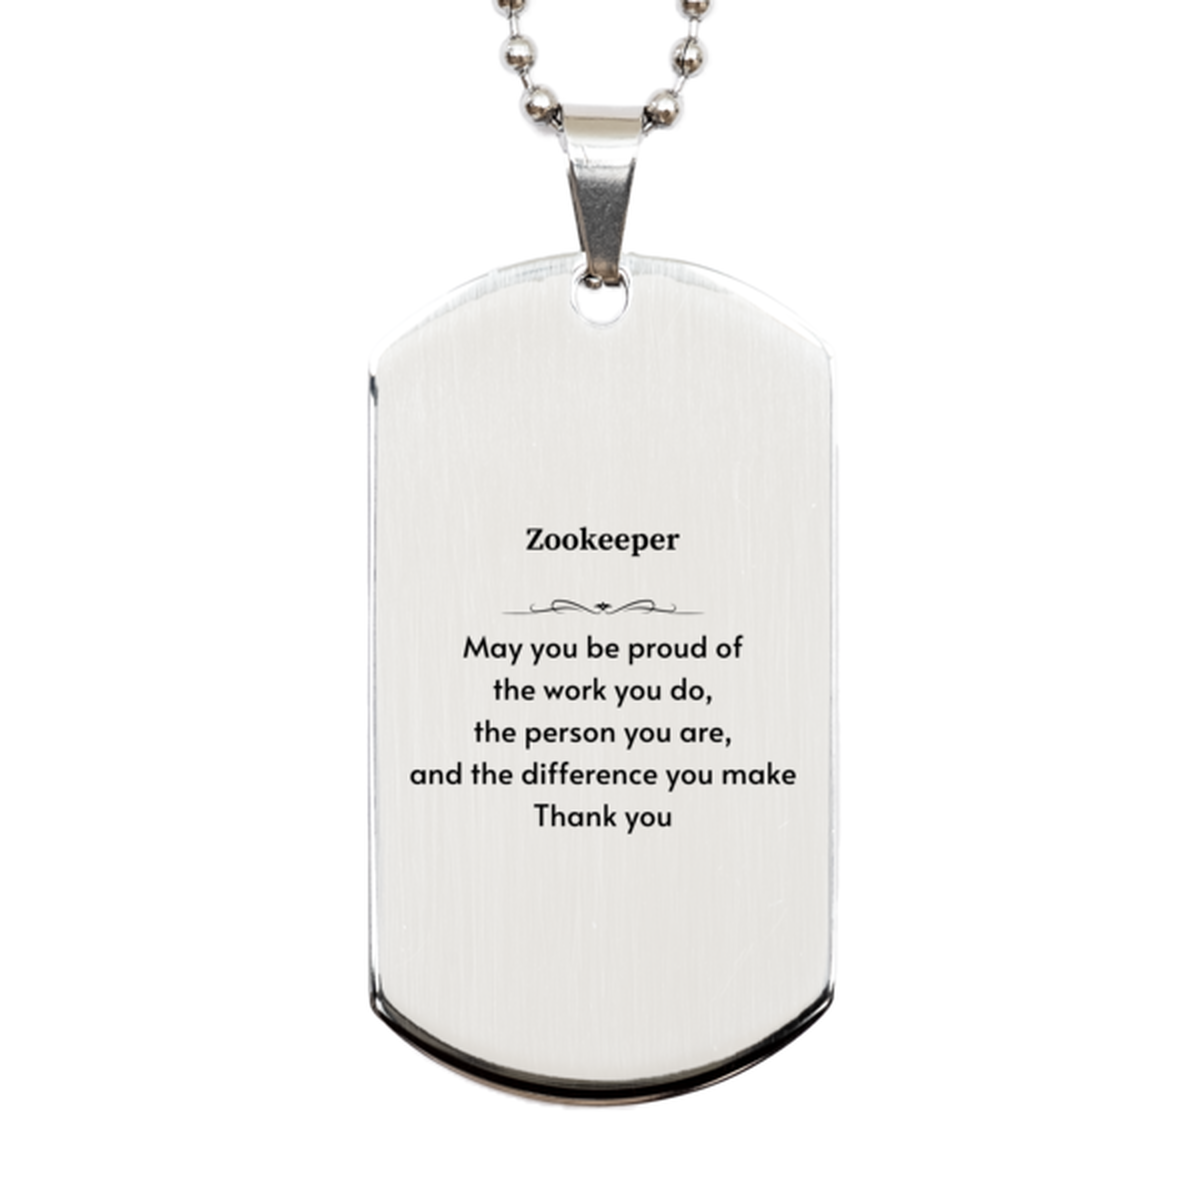 Heartwarming Silver Dog Tag Retirement Coworkers Gifts for Zookeeper, Zookeeper May You be proud of the work you do, the person you are Gifts for Boss Men Women Friends